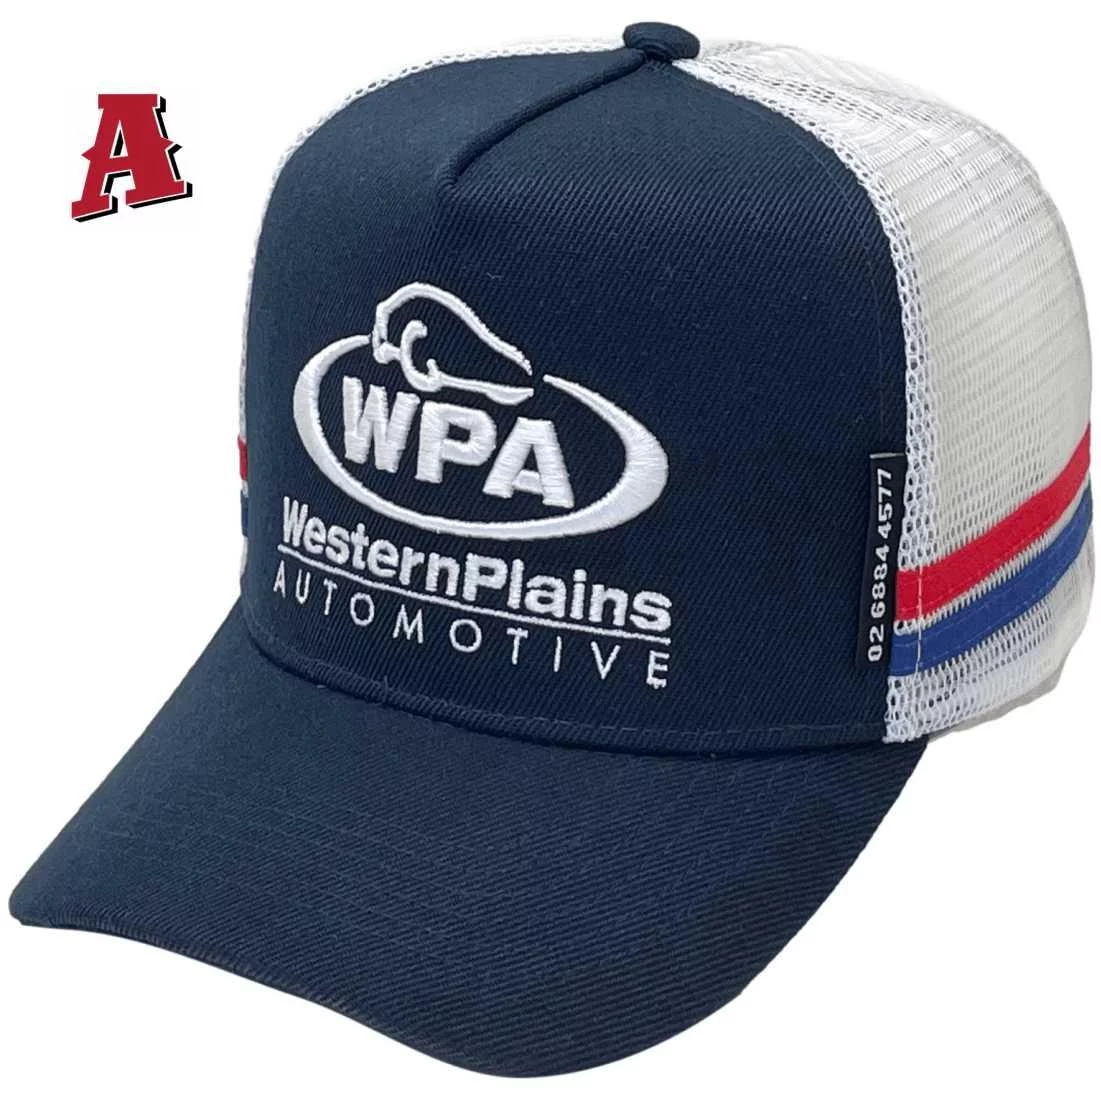 Western Plains Automotive Dubbo NSW Aussie Trucker Hats with Double Side Bands High Profile Snapback with Australian Head Fit Navy White Red Royal